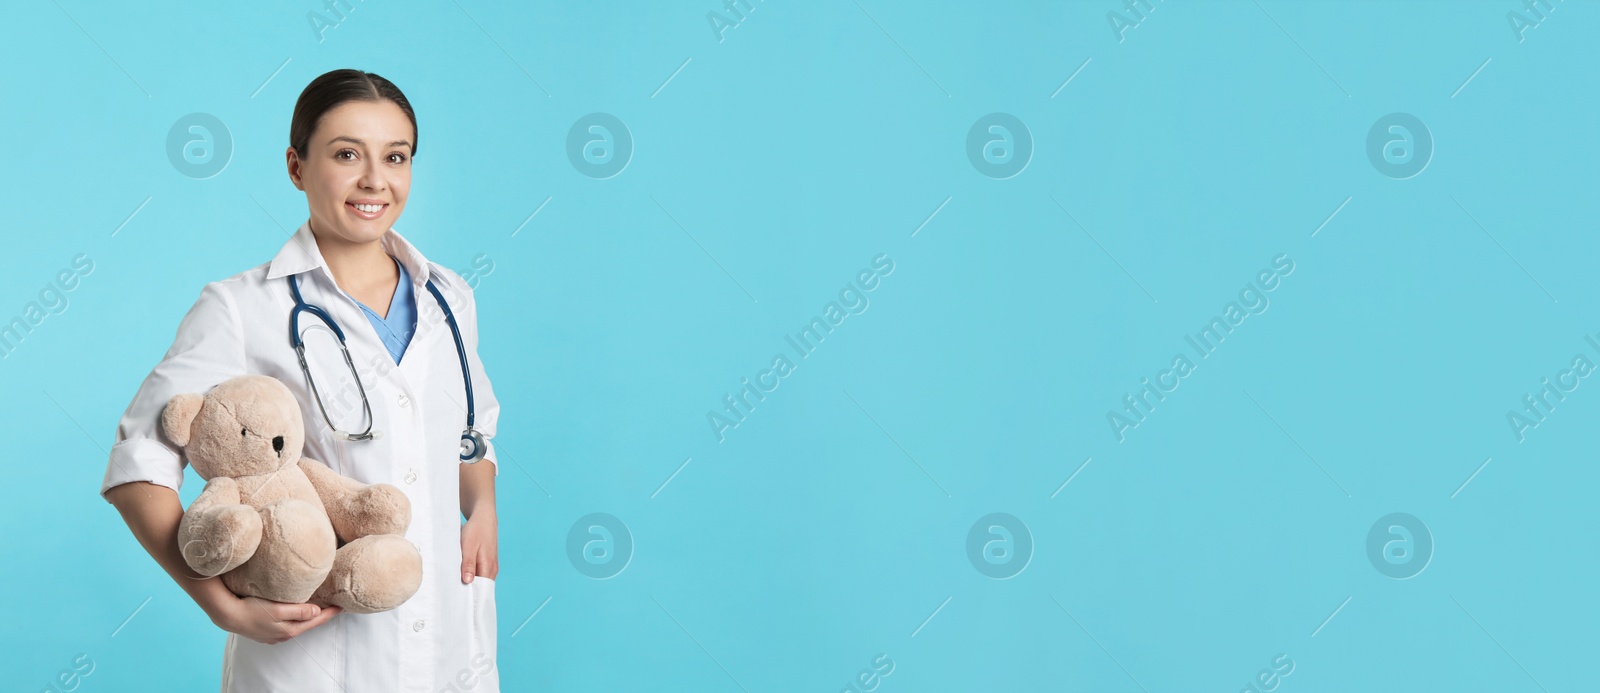 Photo of Pediatrician with teddy bear and stethoscope on turquoise background, space for text